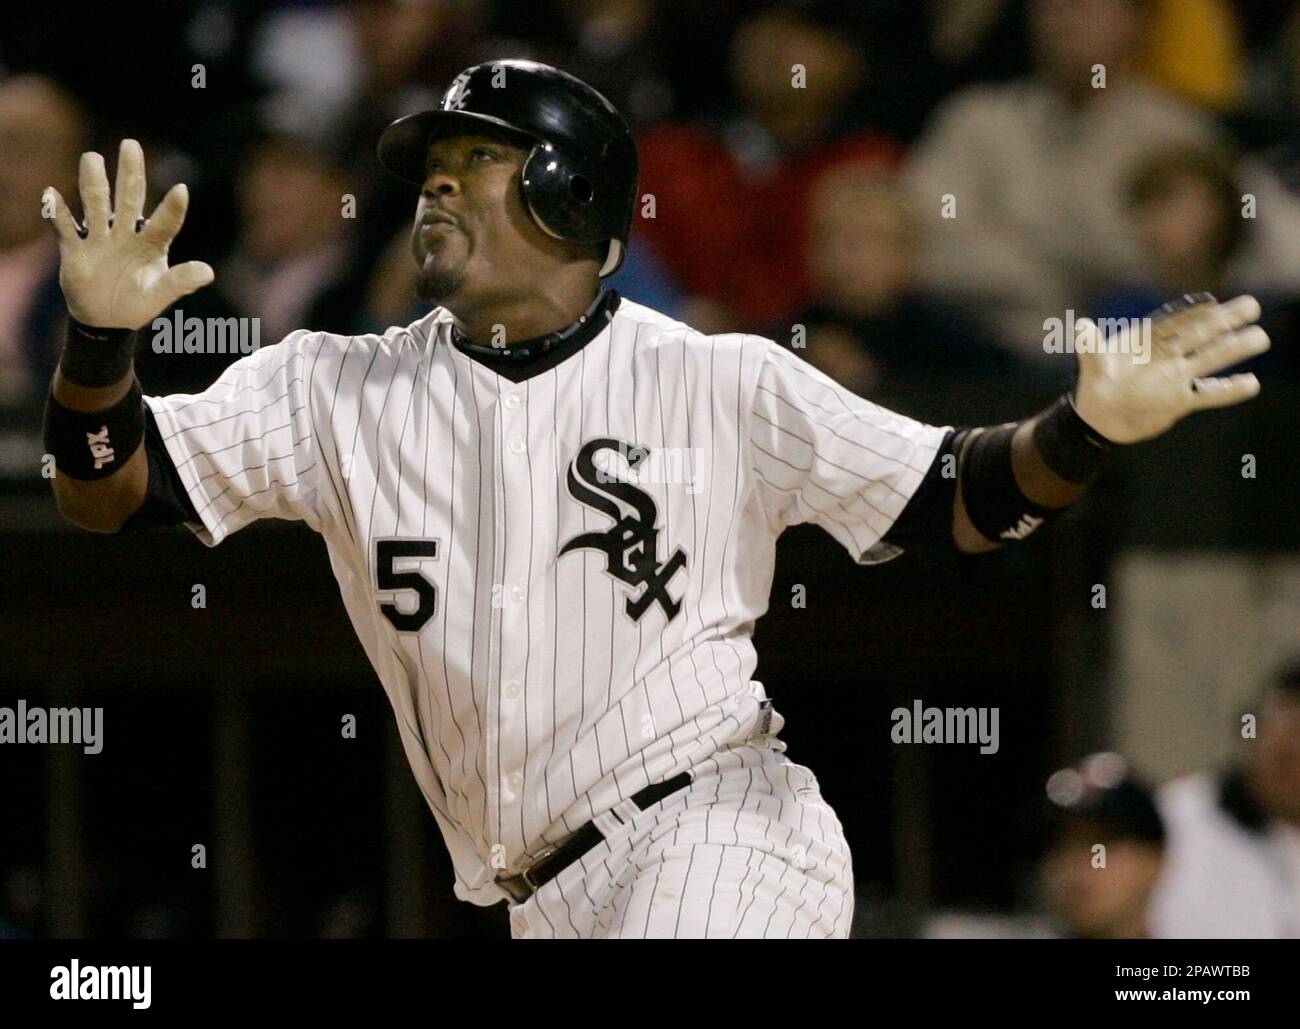 ** FILE ** Chicago White Sox's Juan Uribe watches his two-run home run against the Cleveland Indians during a baseball game in Chicago in this Sept. 11, 2007, file photo. Uribe and the White Sox agreed Wednesday, Nov. 7, 2007, to a $4.5 million, one-year contract that keeps the slick-fielding shortstop in Chicago.(AP Photo/Brian Kersey) Stock Photo